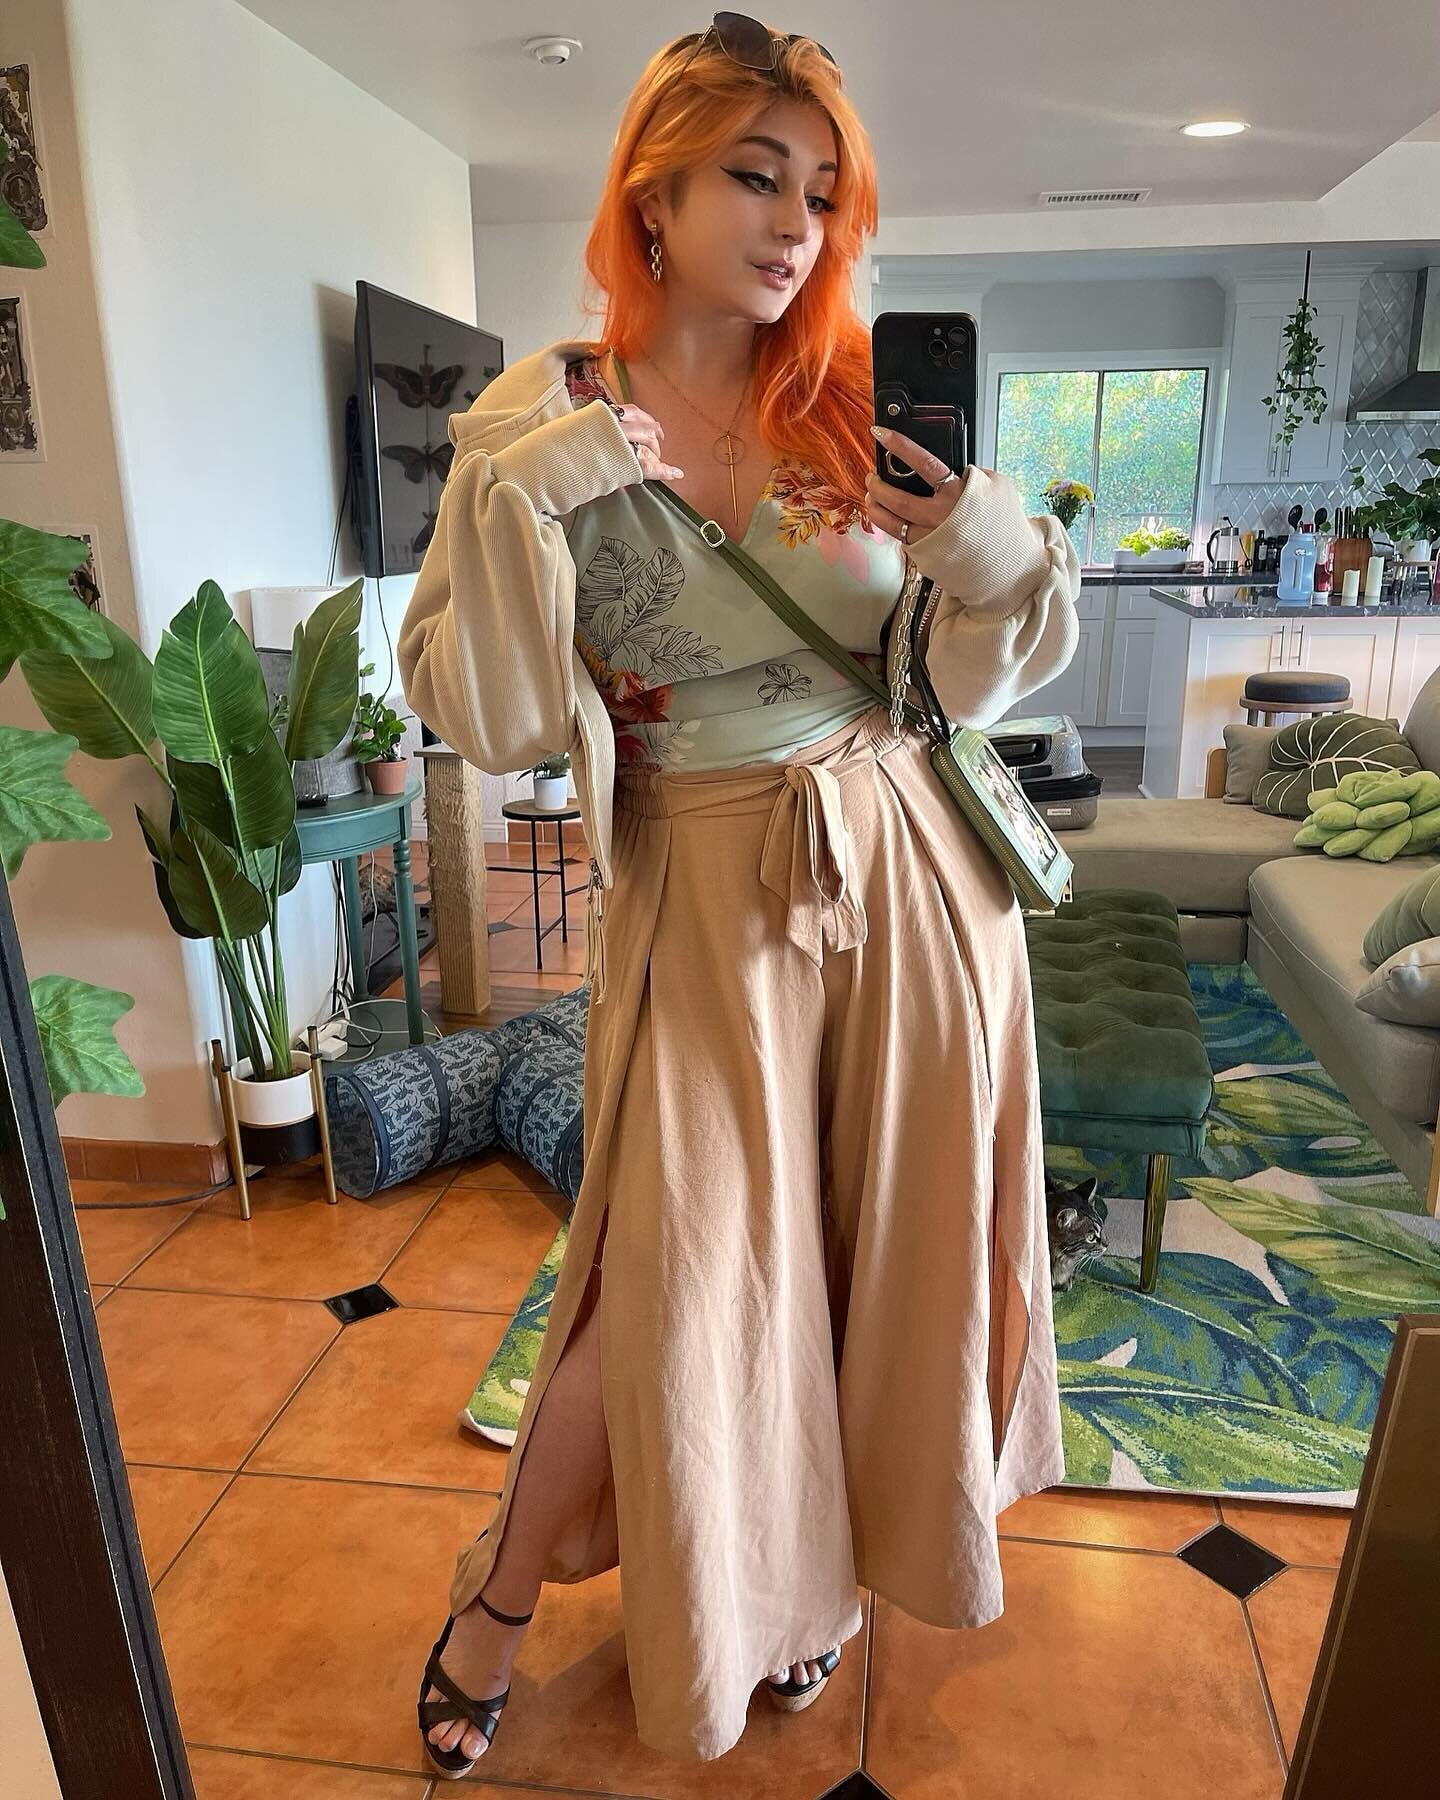 This is the most non-alt outfit I think I own now since starting to clear out my closet but I need to find cute &ldquo;she lives in the woods with the elves&rdquo; clothing vibes pls help 🌿✨
.
#dungeonsanddragons #dungeonplaylist #elves #altfashion 